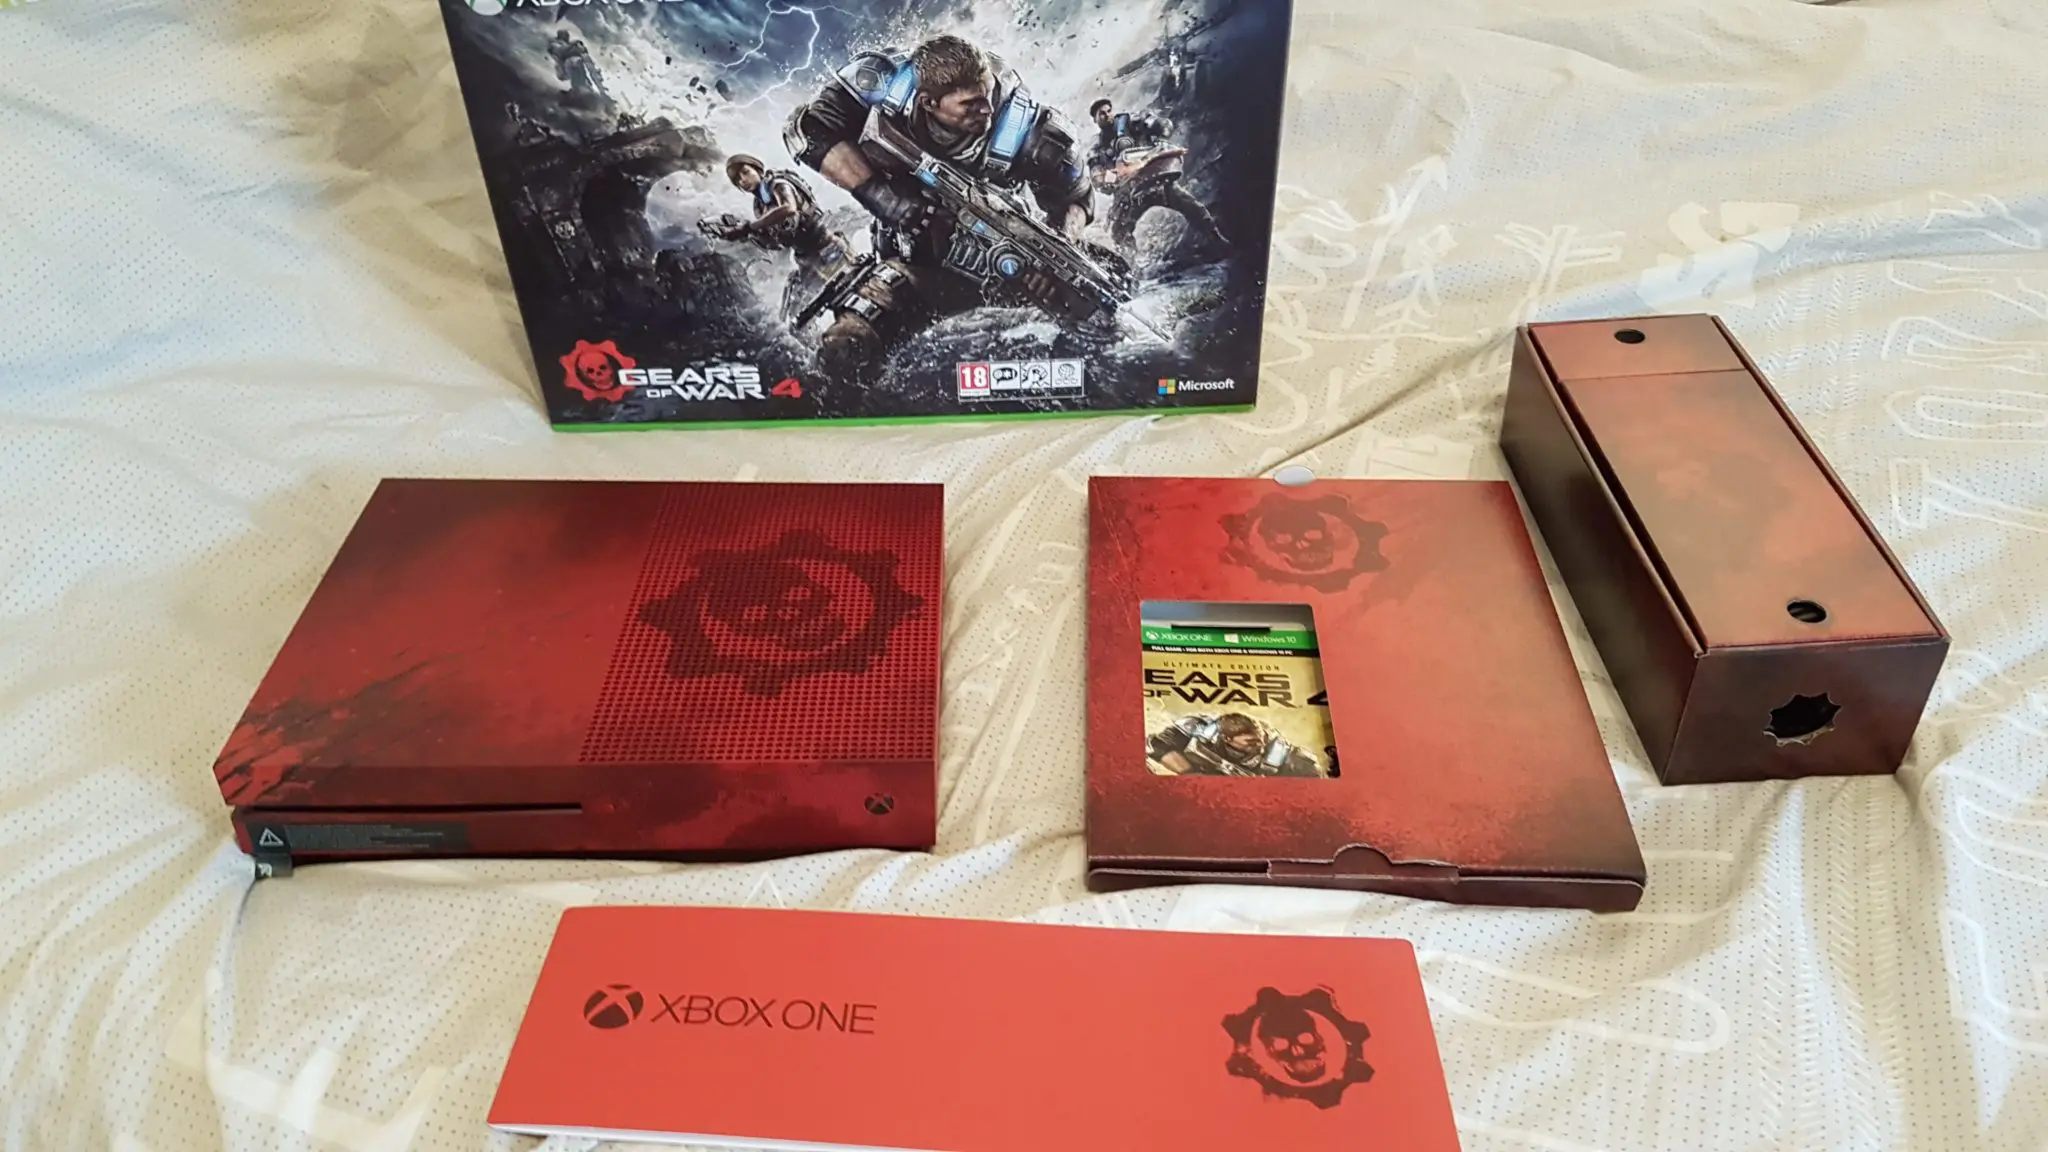 Gears of war 4 xbox one s